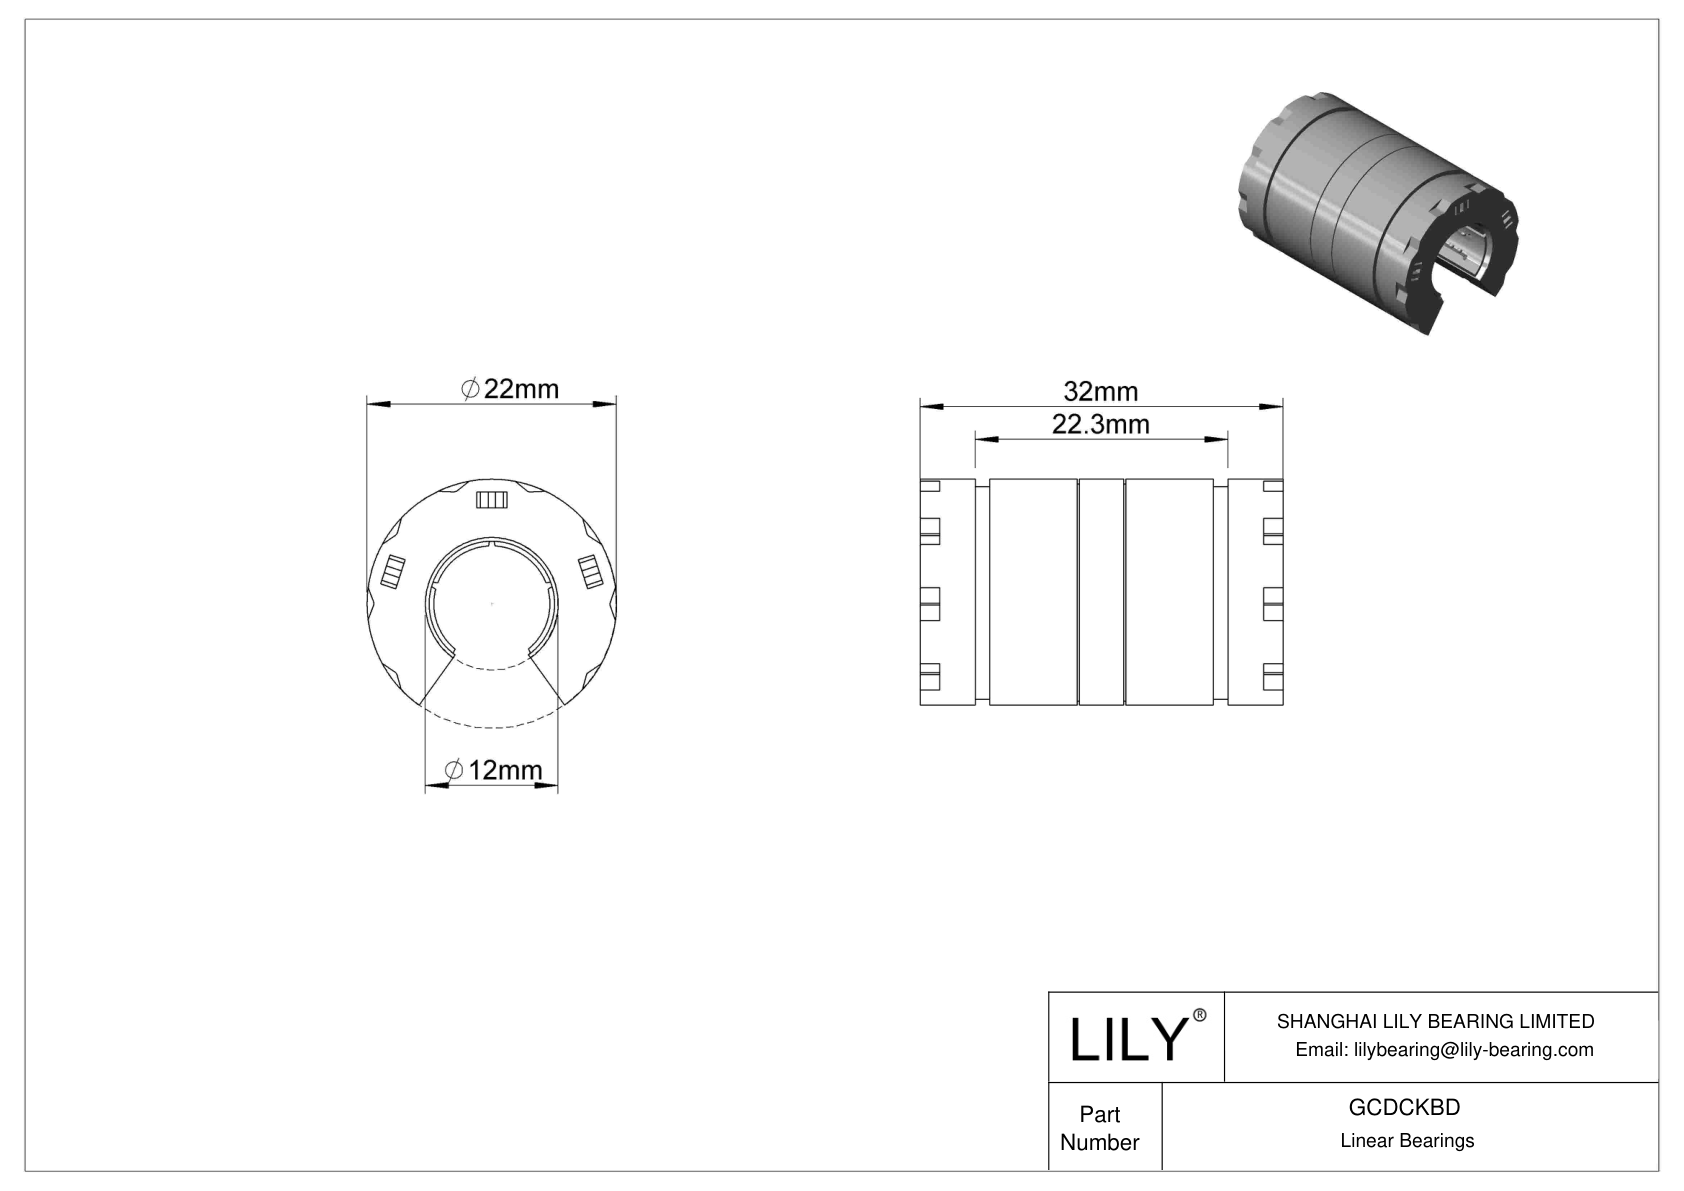 GCDCKBD High-Load Linear Ball Bearings for Support Rail Shafts cad drawing